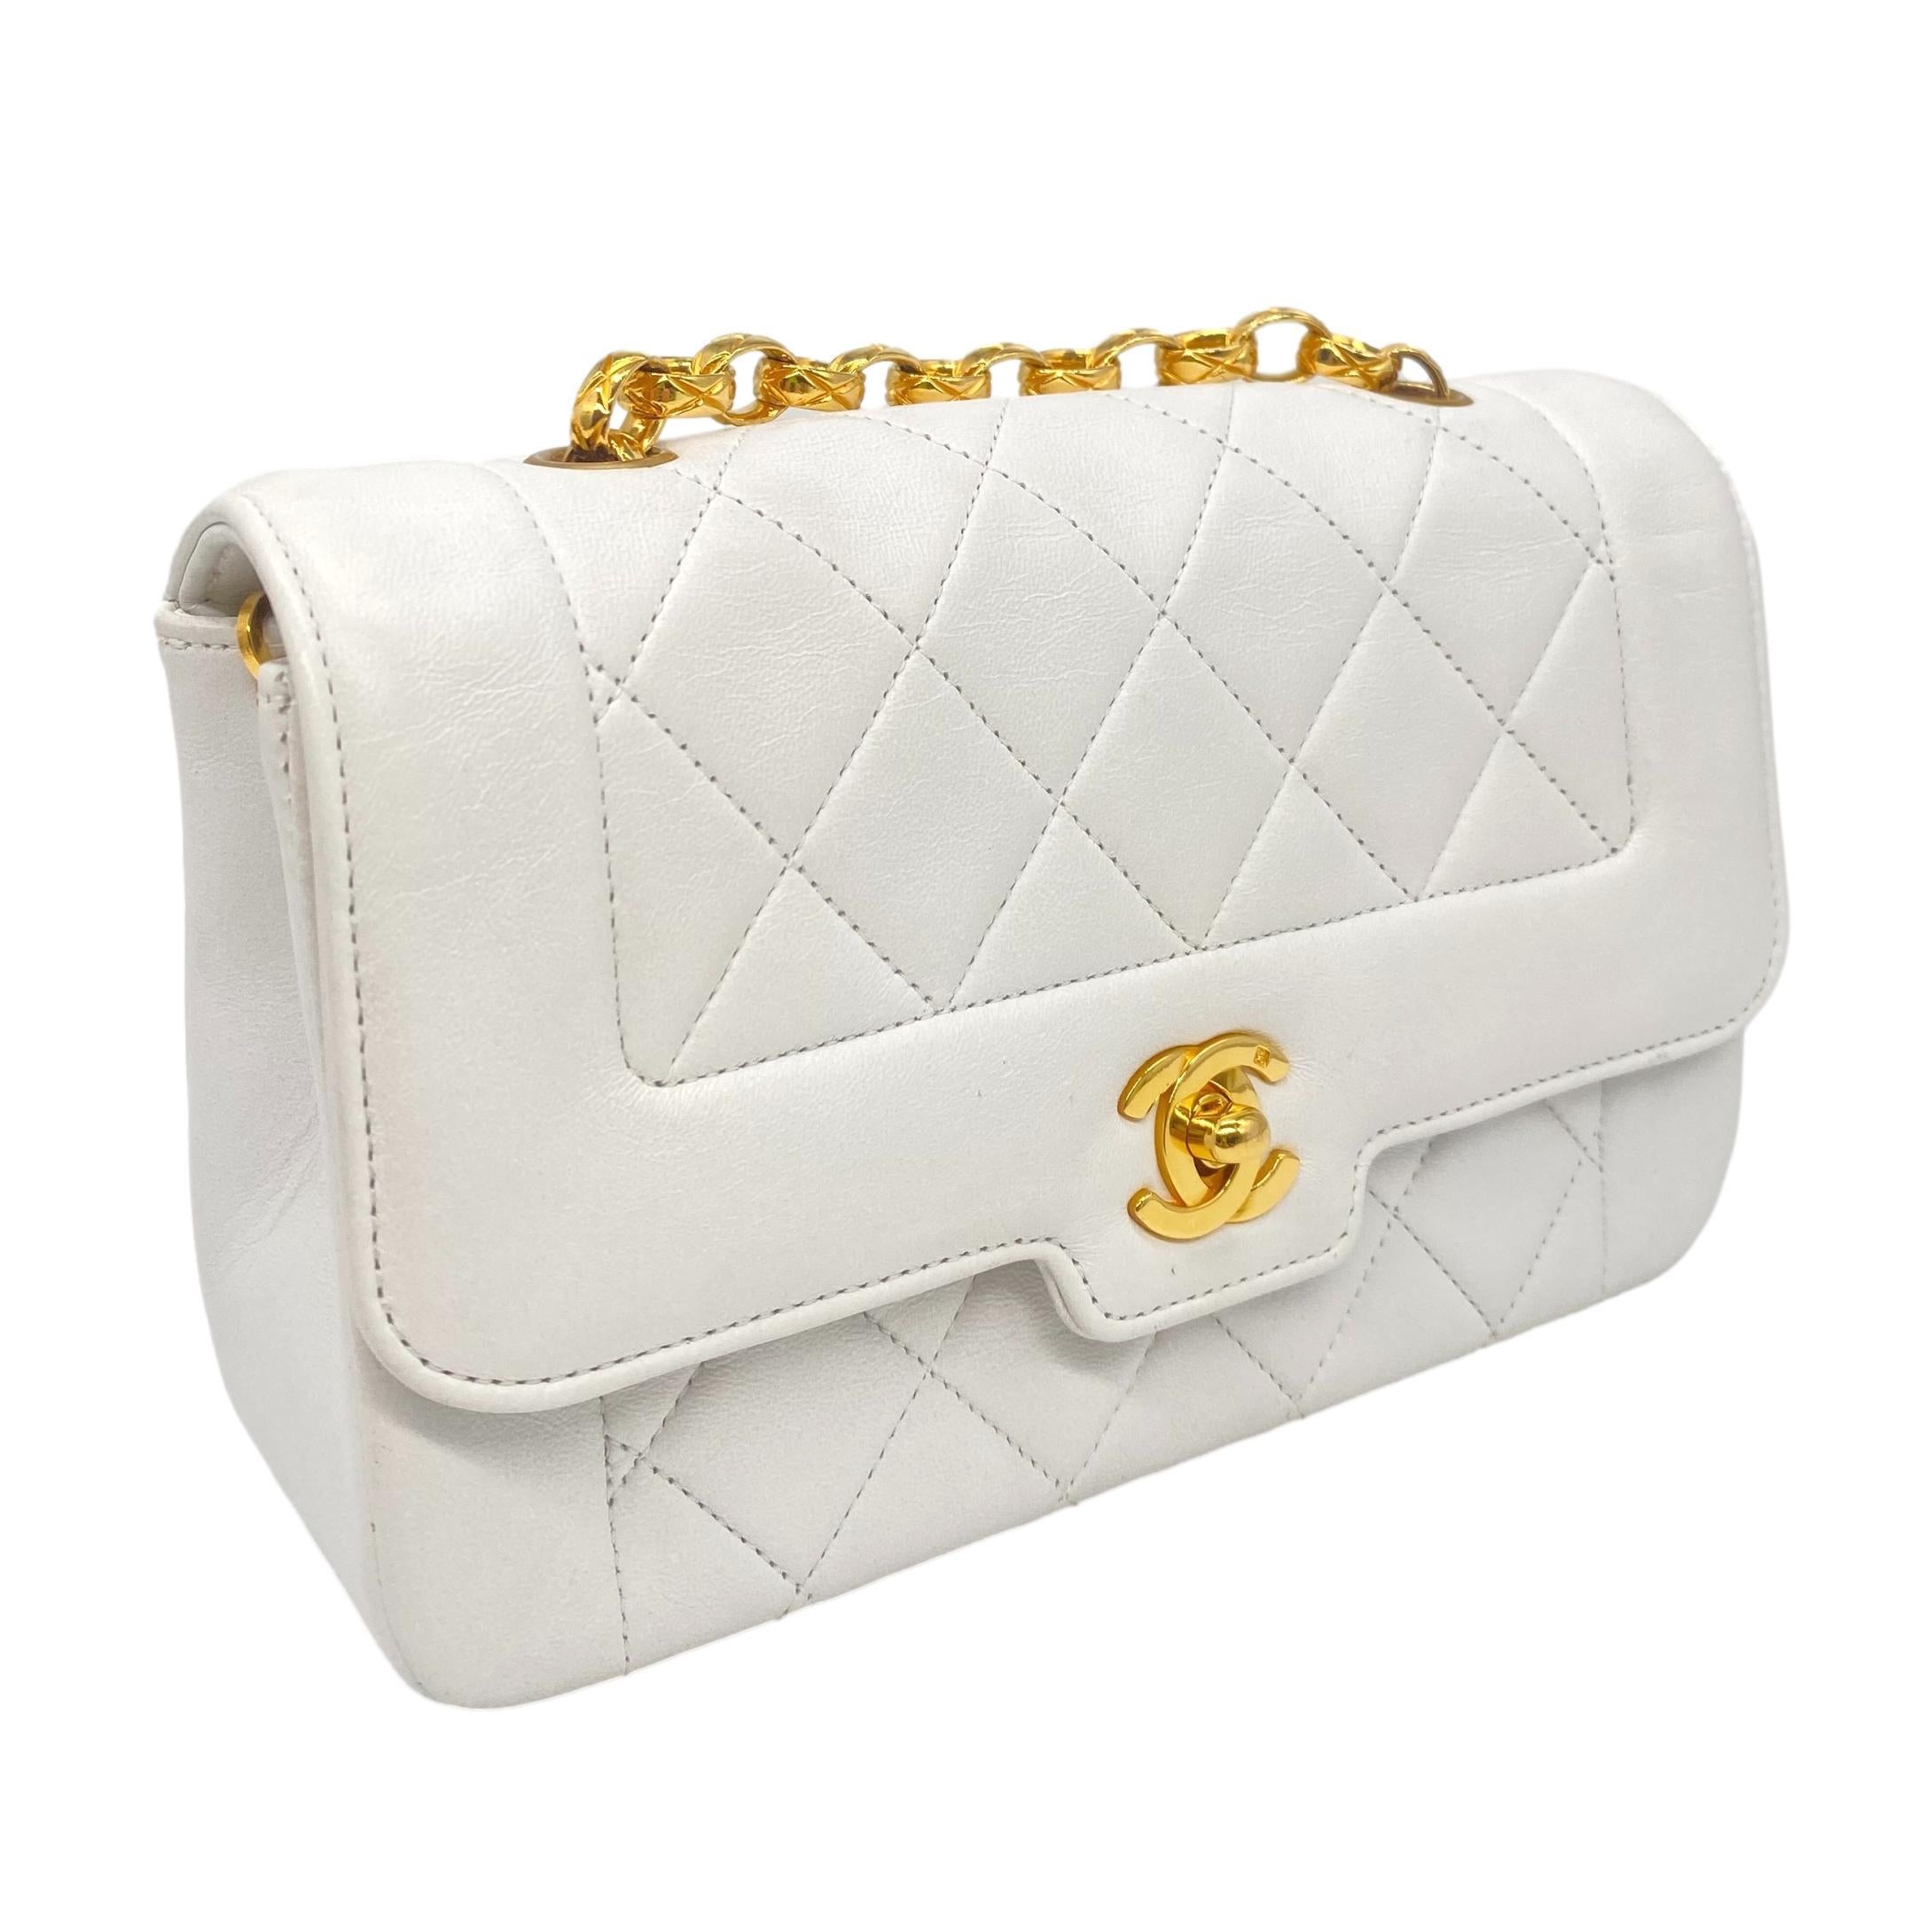 Gray Chanel Mini Quilted White Lambskin Flap Bijoux Chain Shoulder Bag, 1991 - 1994.